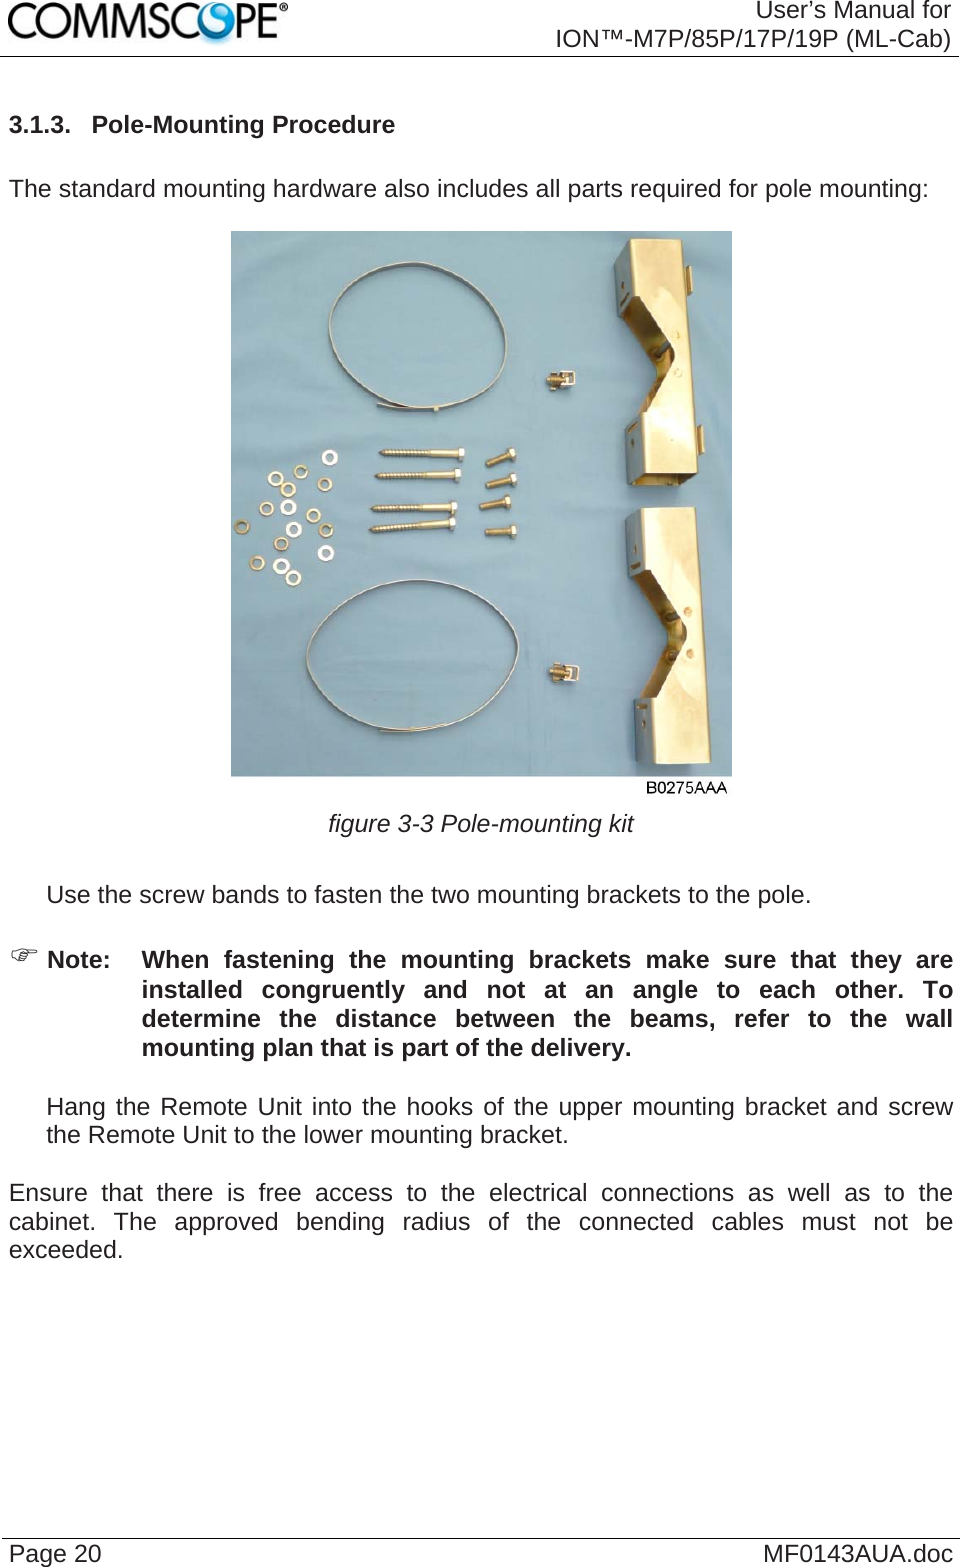  User’s Manual for ION™-M7P/85P/17P/19P (ML-Cab) Page 20  MF0143AUA.doc3.1.3.  Pole-Mounting Procedure  The standard mounting hardware also includes all parts required for pole mounting:   figure 3-3 Pole-mounting kit     Use the screw bands to fasten the two mounting brackets to the pole.  ) Note:  When fastening the mounting brackets make sure that they are installed congruently and not at an angle to each other. To determine the distance between the beams, refer to the wall mounting plan that is part of the delivery.     Hang the Remote Unit into the hooks of the upper mounting bracket and screw the Remote Unit to the lower mounting bracket.  Ensure that there is free access to the electrical connections as well as to the cabinet. The approved bending radius of the connected cables must not be exceeded.    